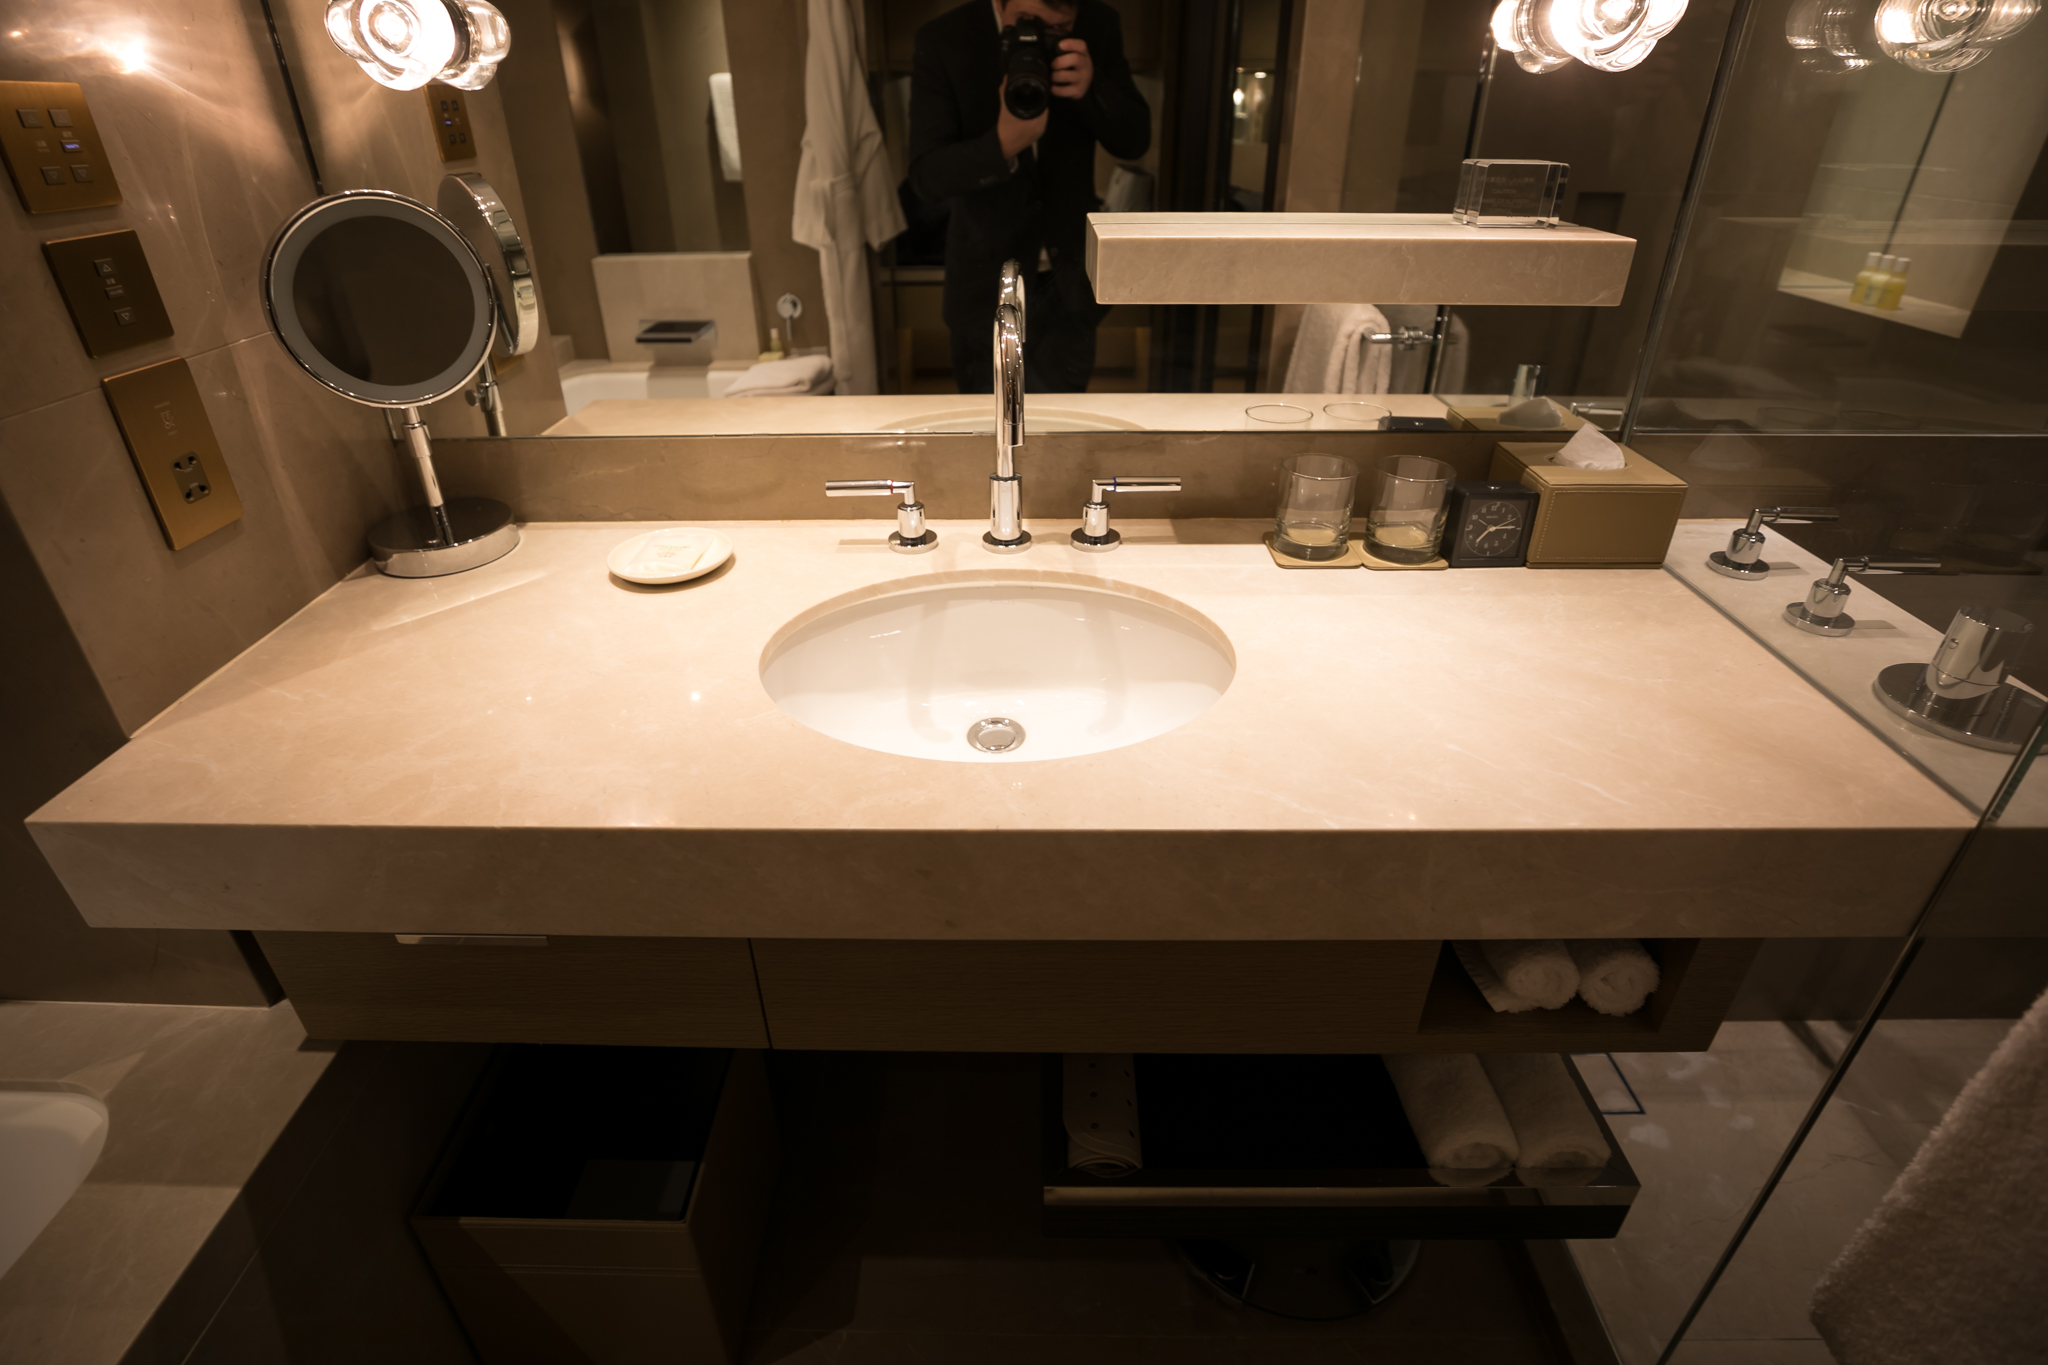 a person taking a picture of a bathroom sink